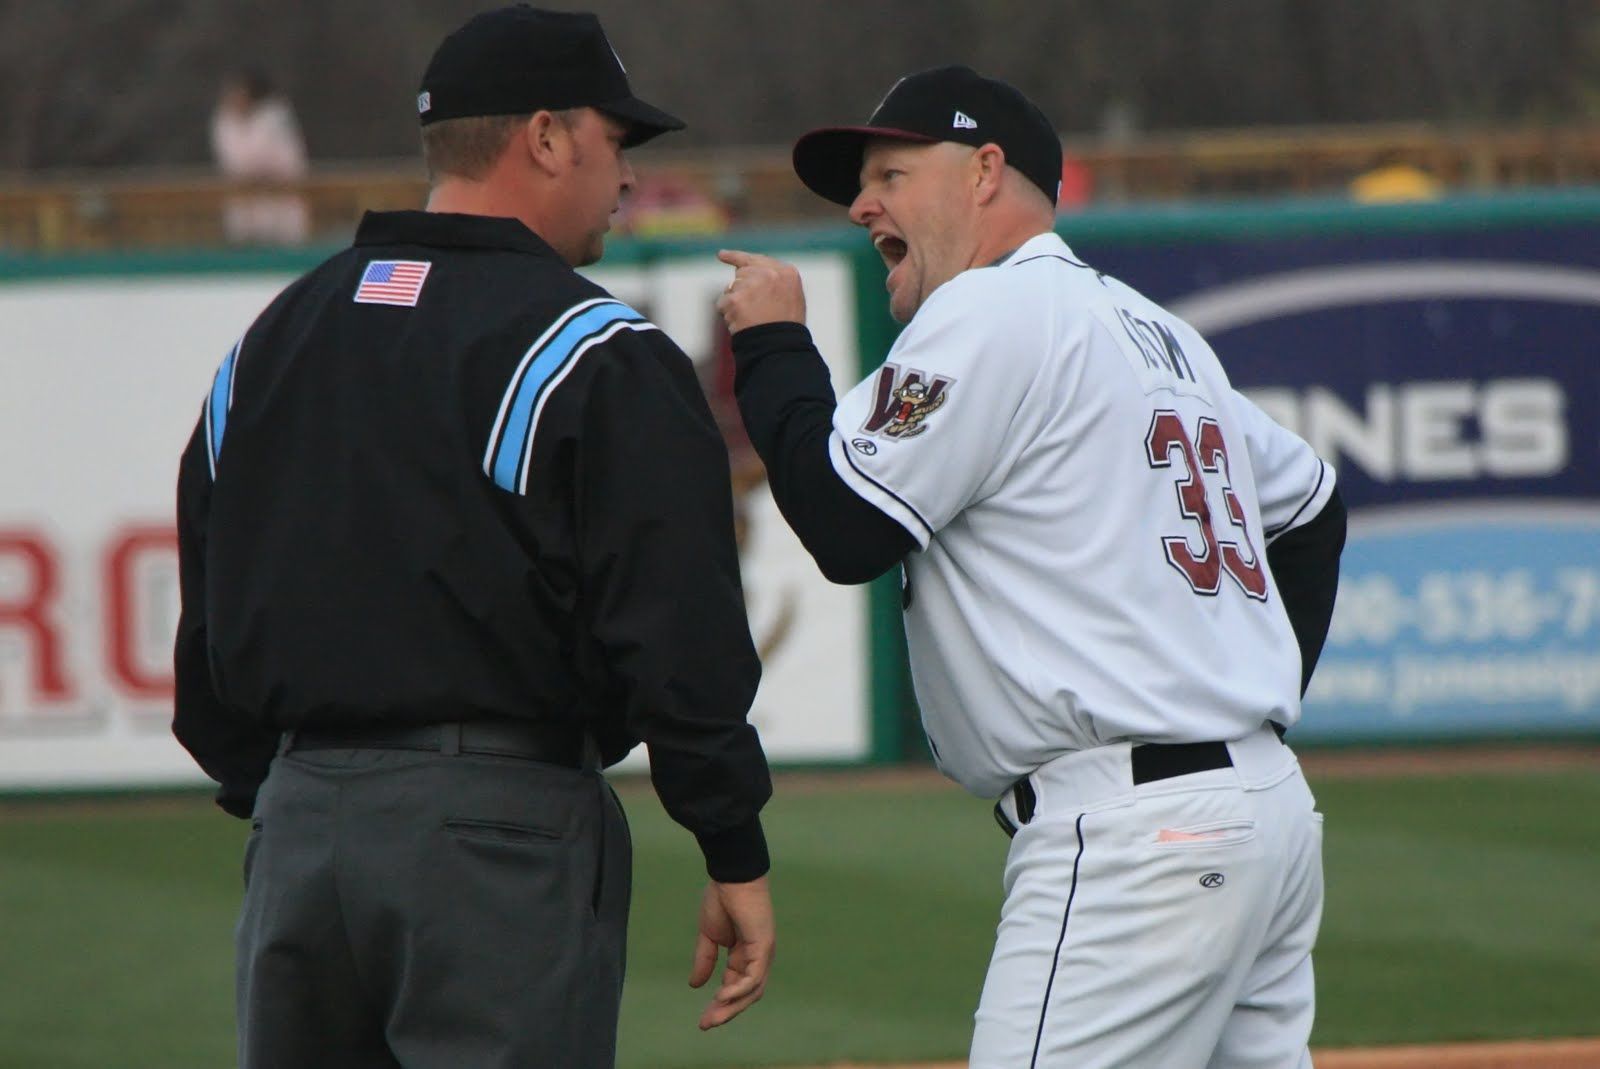 Jeff Isom arguing with an umpire